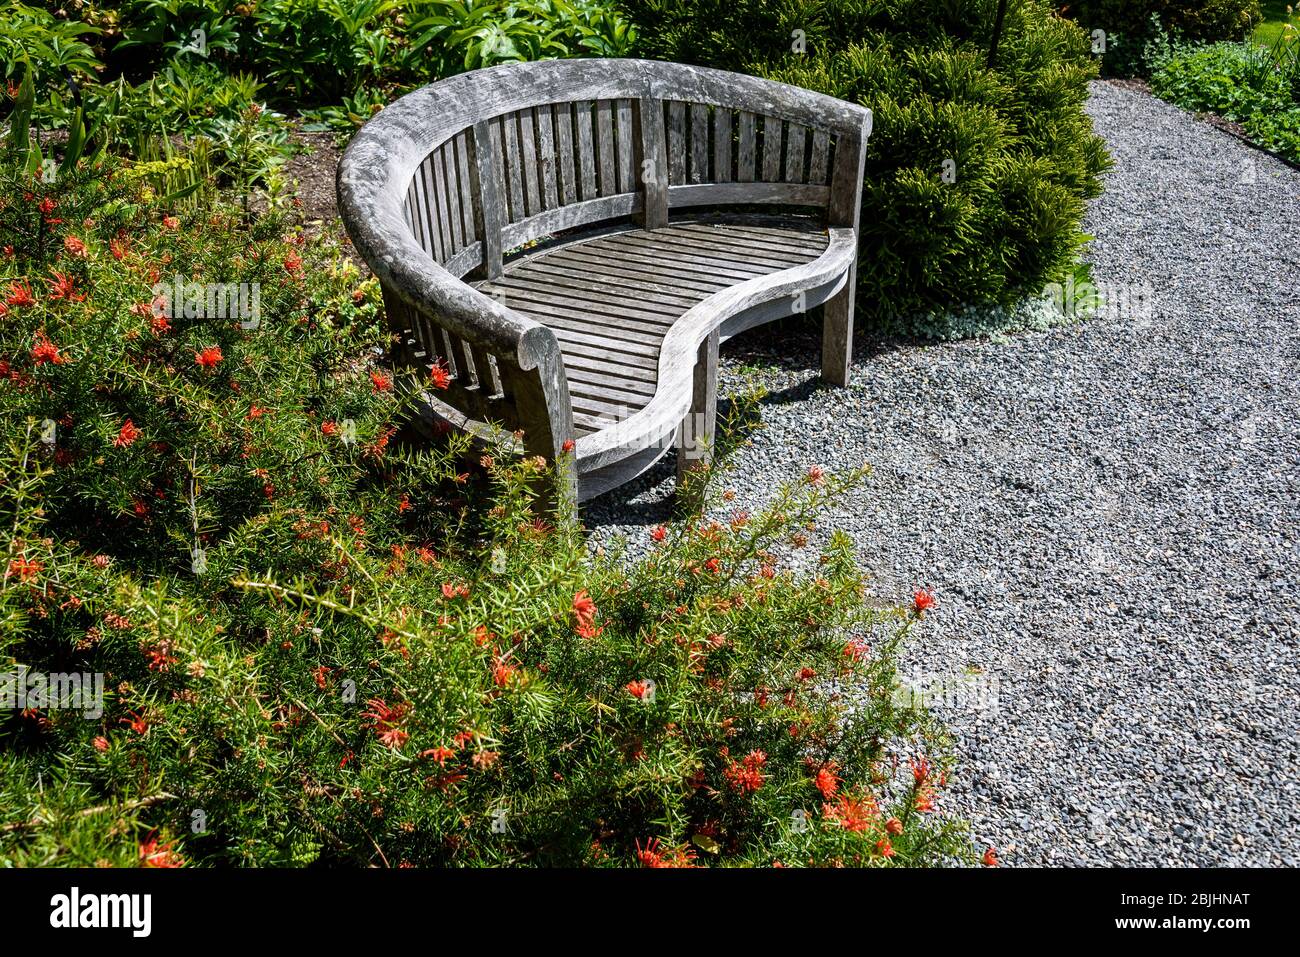 Weathered wooden bench beside a gravel path in a sunny garden Stock Photo